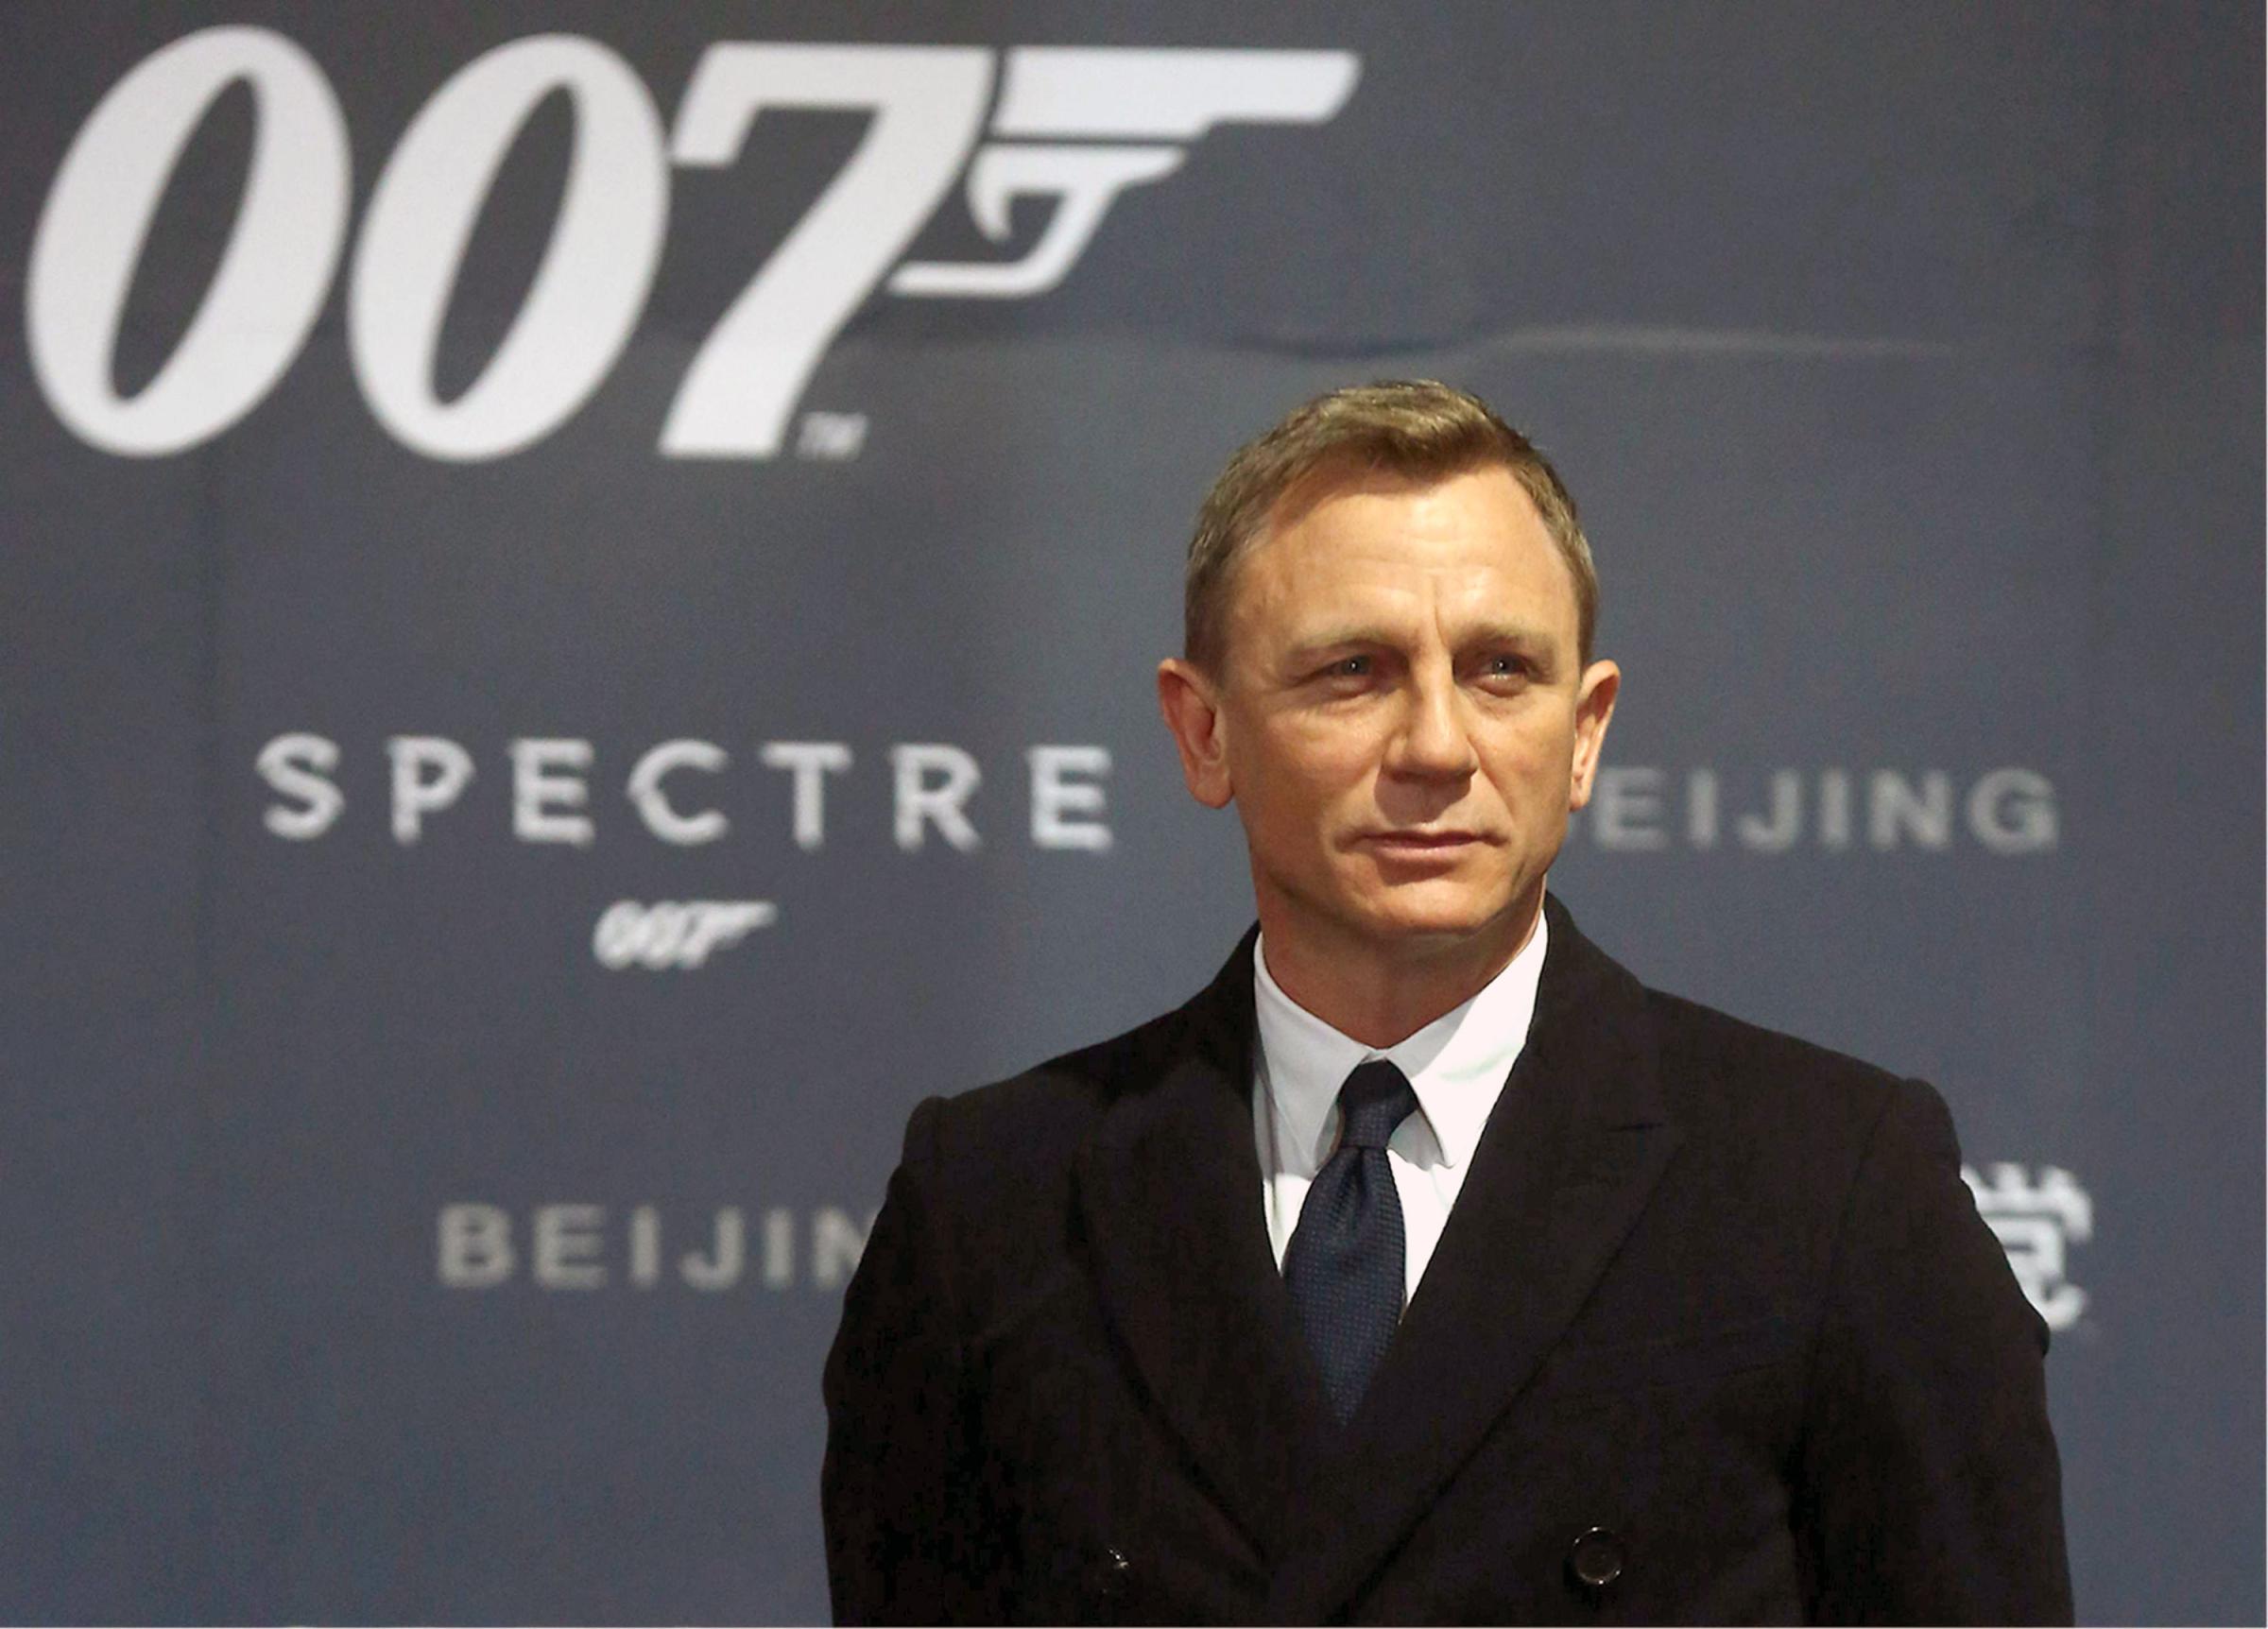 Actor Daniel Craig attends 'Spectre' premiere at The Place on November 12, 2015 in Beijing, China.